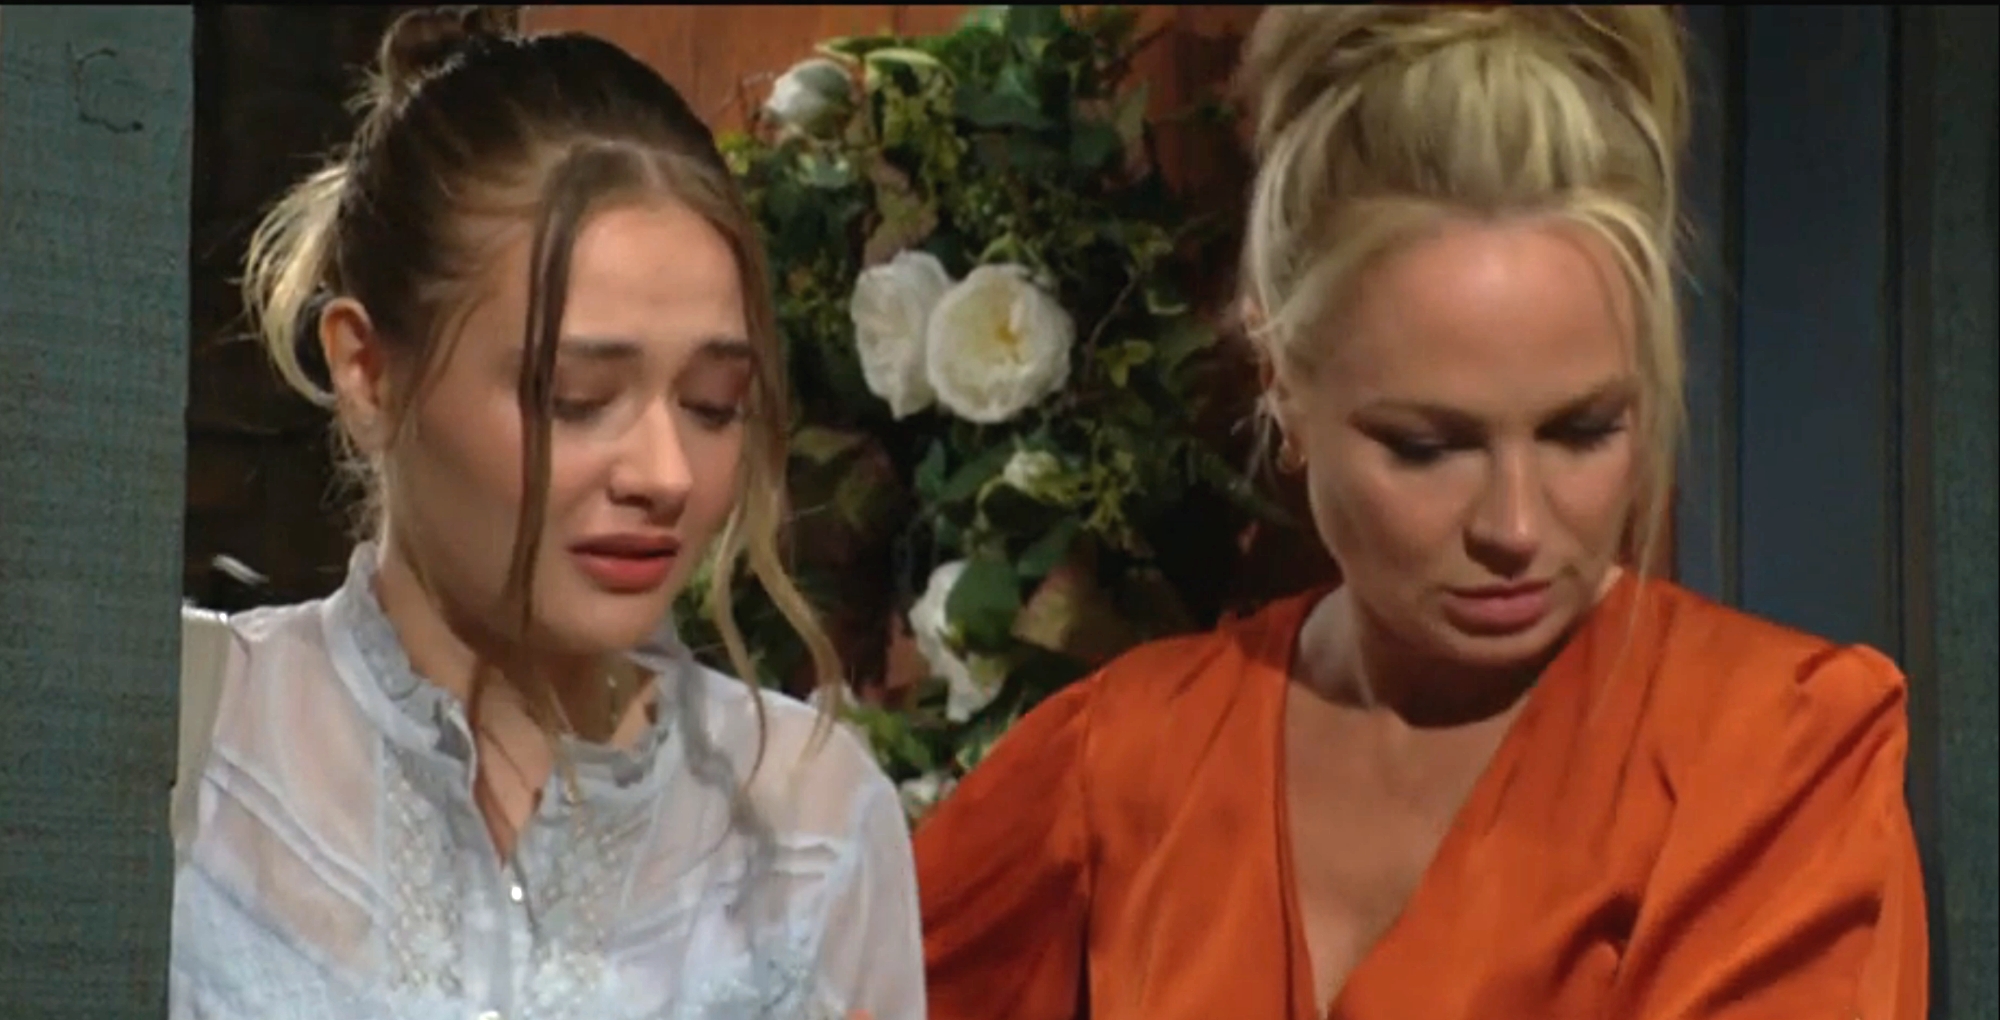 faith newman and sharon get a shock in the young and the restless recap for june 6, 2023.